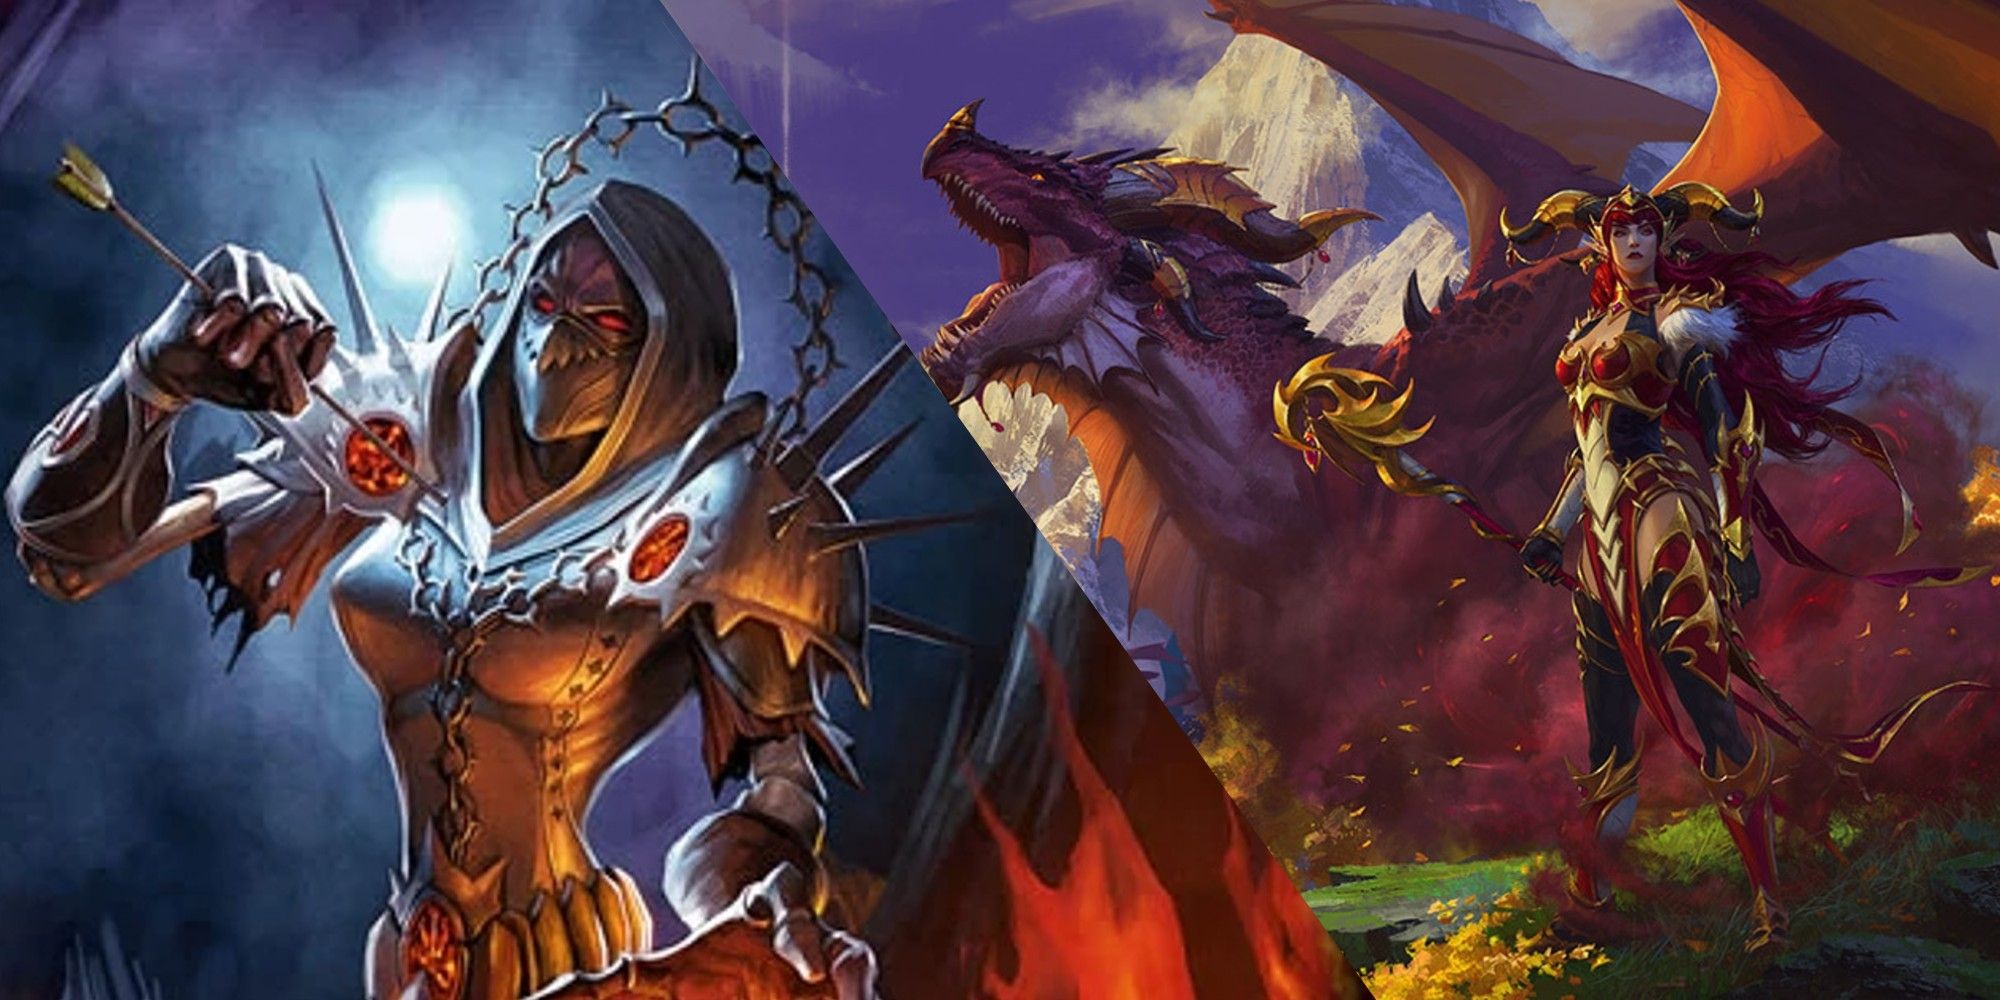 Official art of a World of Warcraft Warlock and the new expansion, Dragonflight.